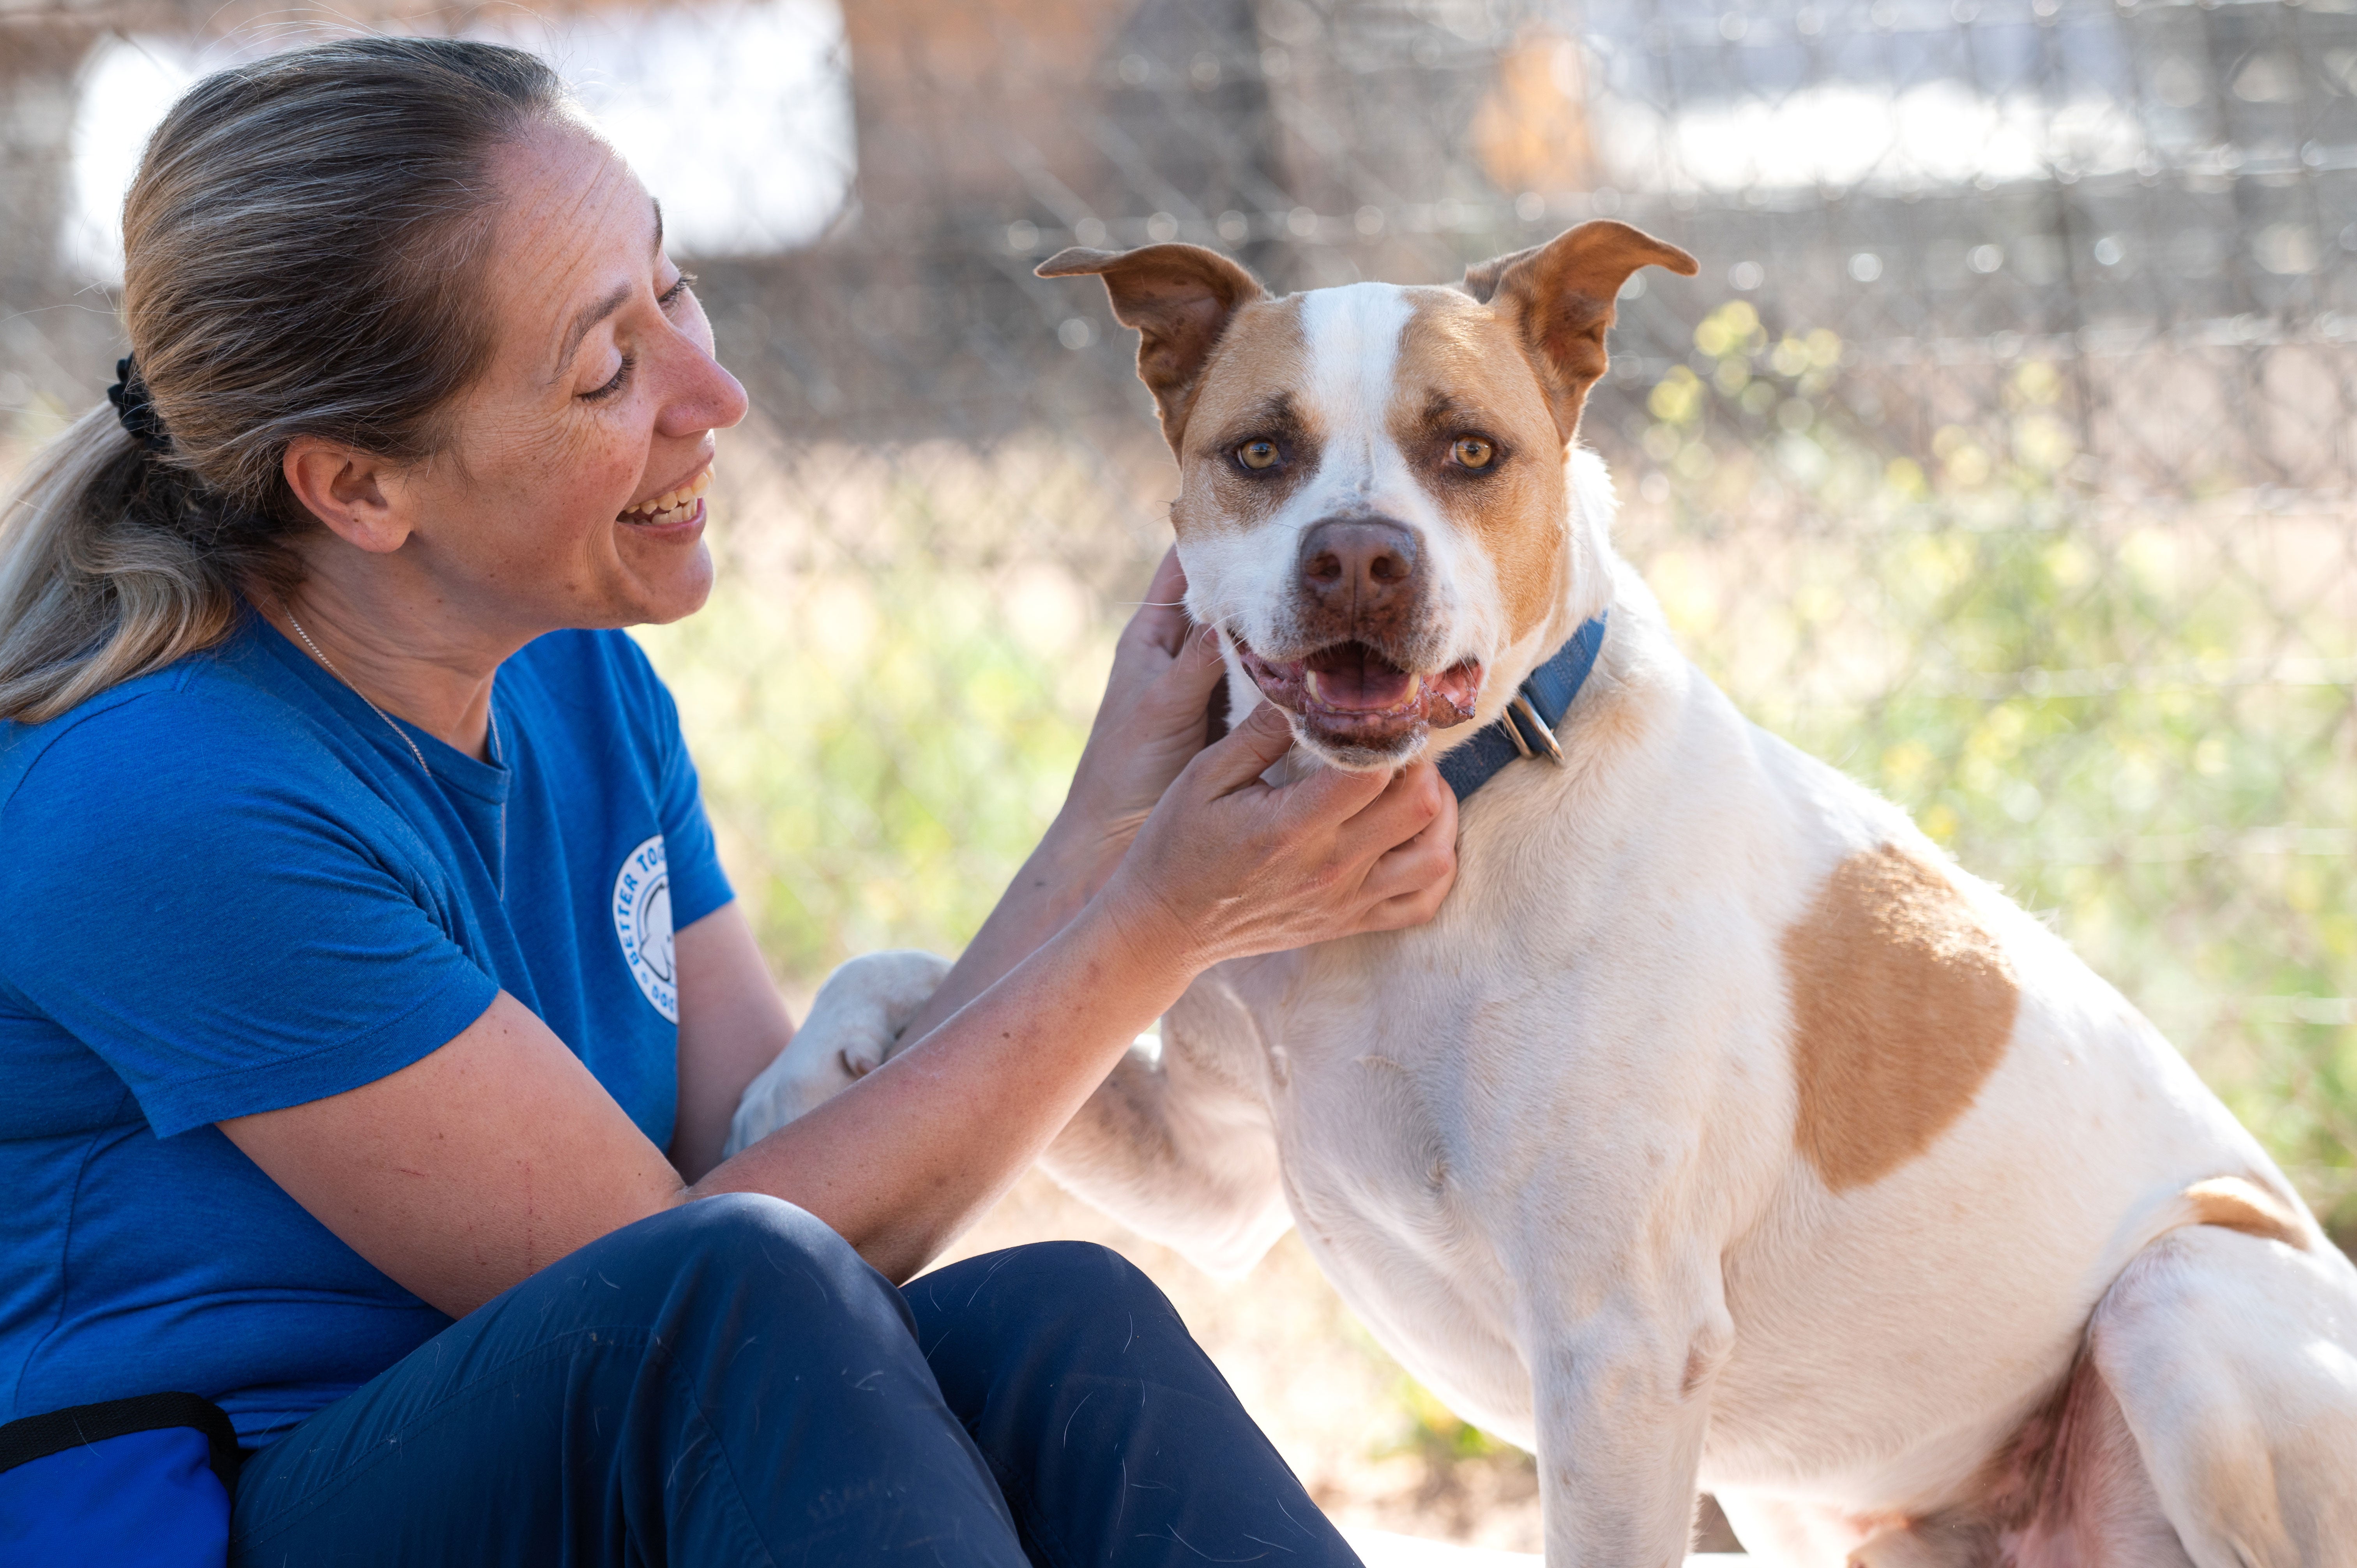 Best Friends-backed degree inspires, guides new animal rescue organization  | Best Friends Animal Society - Save Them All